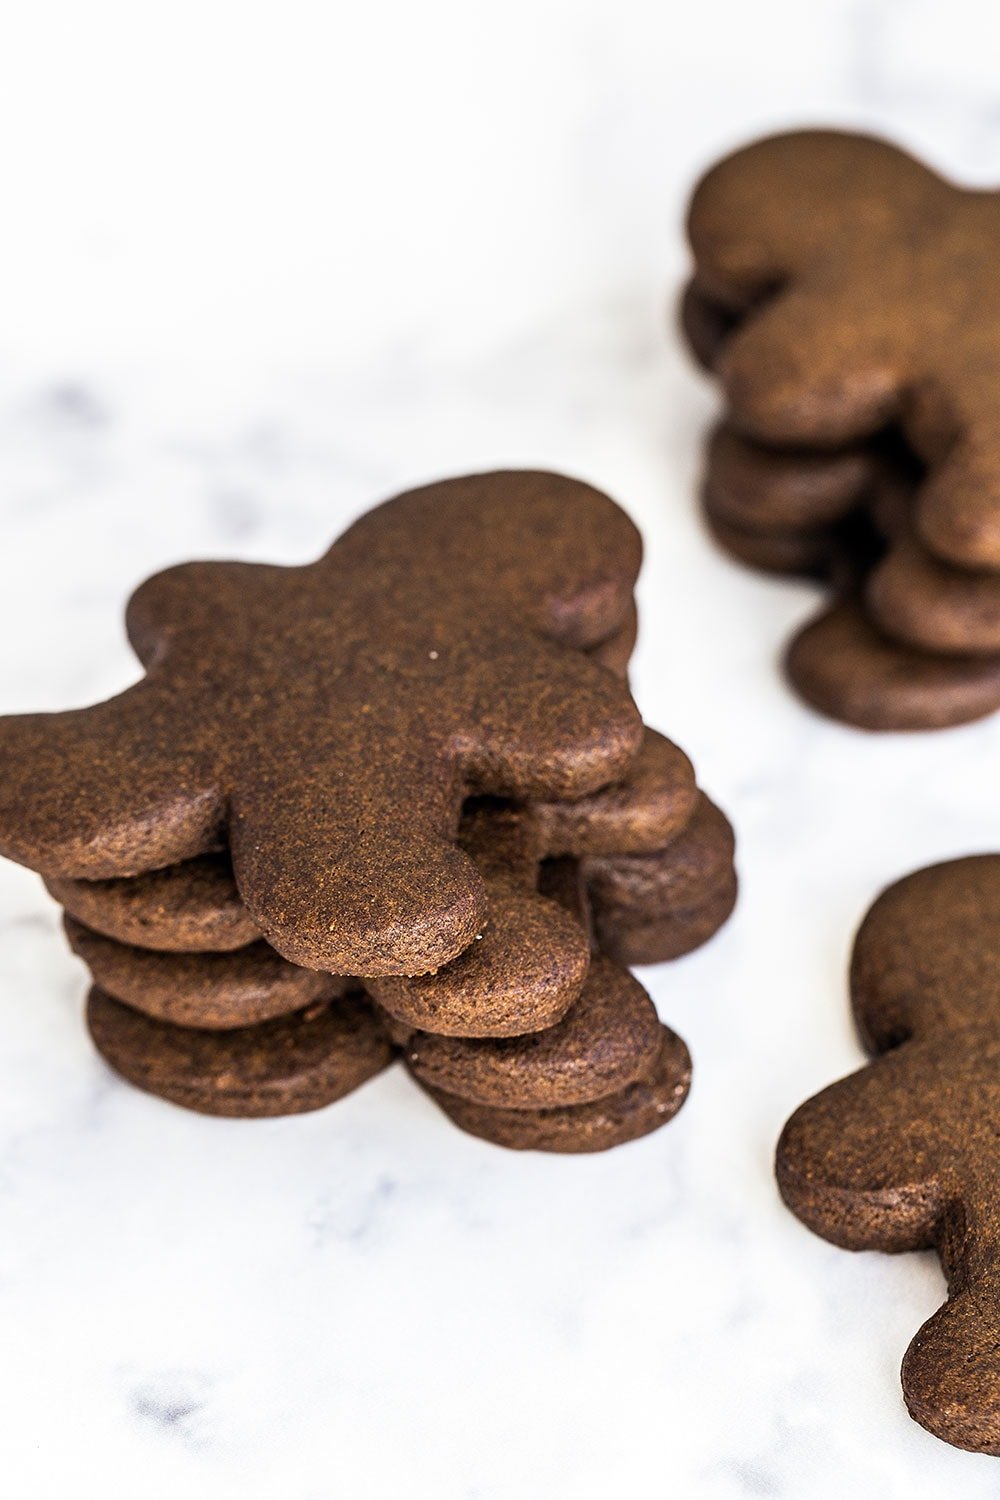 Easy Gingerbread Cookies are thick, soft, and perfectly maintain their adorable shape. This dough is a dream to work with and the cookies can be made ahead of time! Easy cookie icing included.